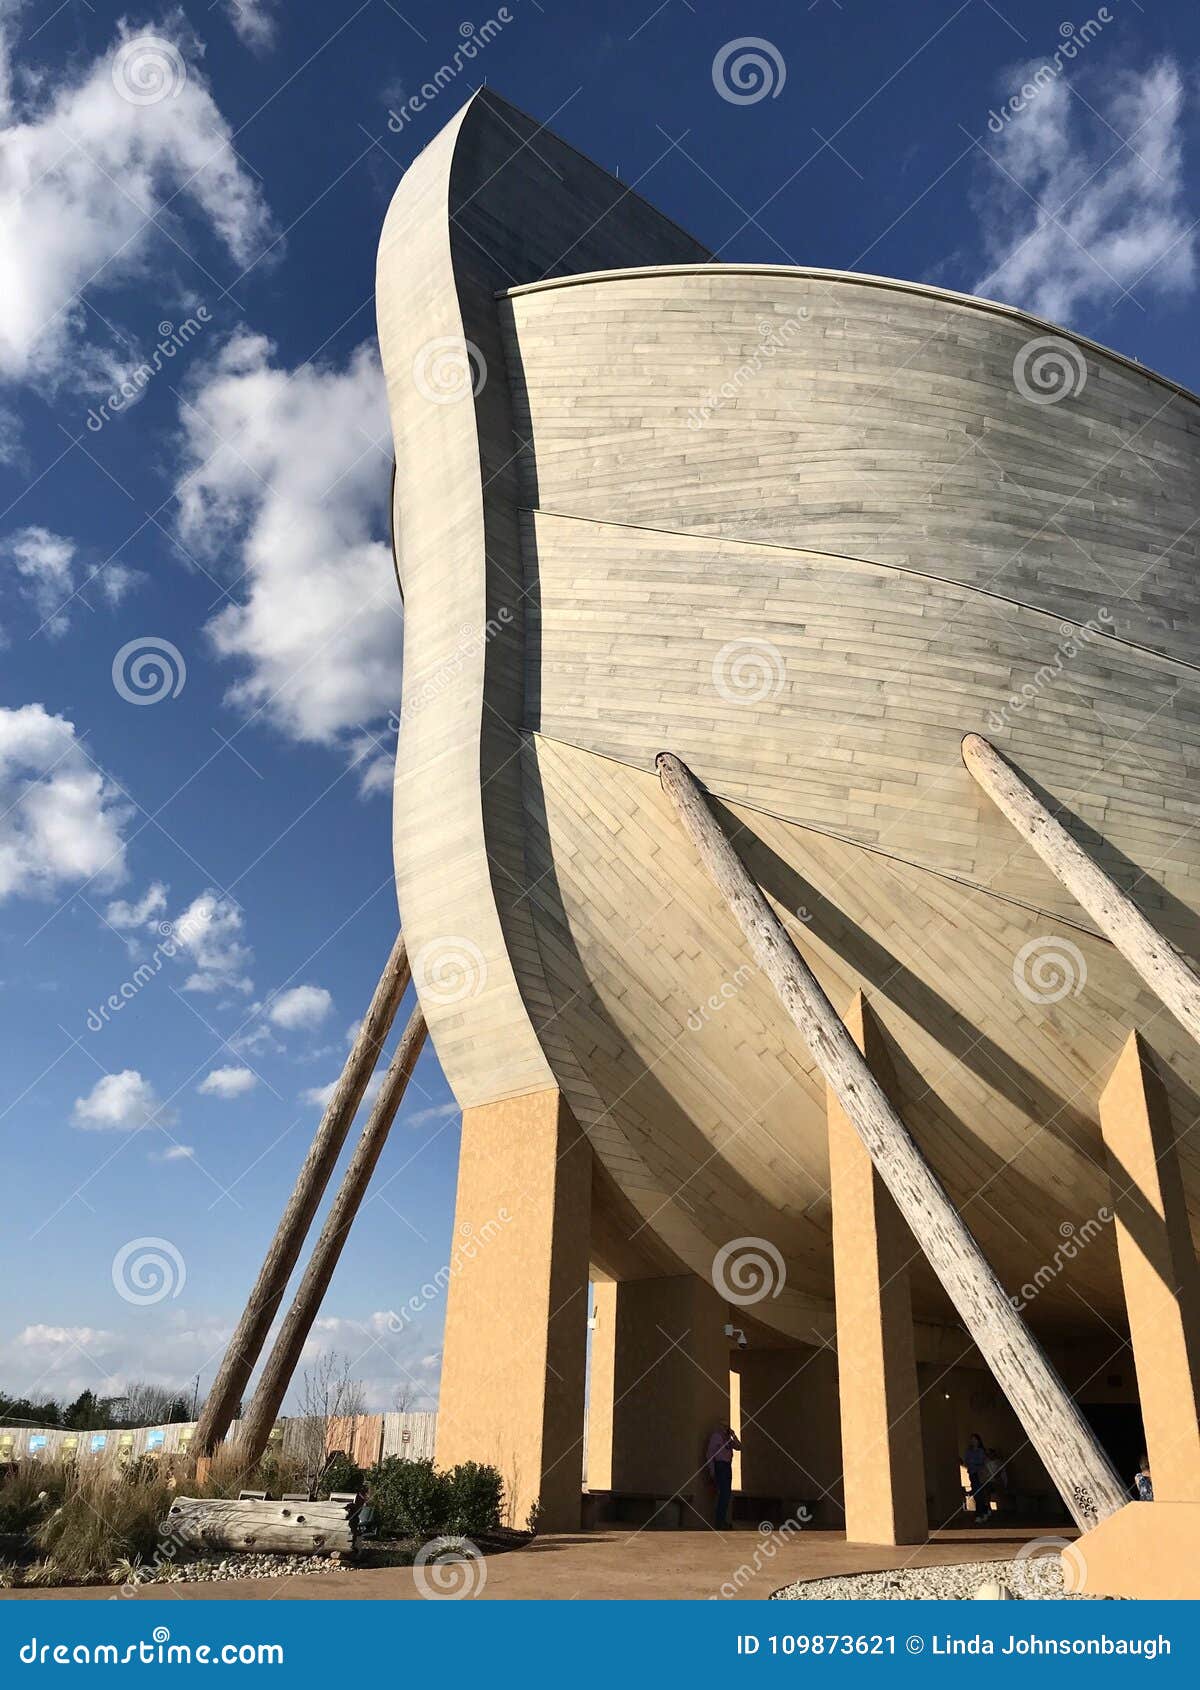 Noah S Ark Exterior In The Ark Encounter Theme Park Editorial Photo Image Of Noahs Large